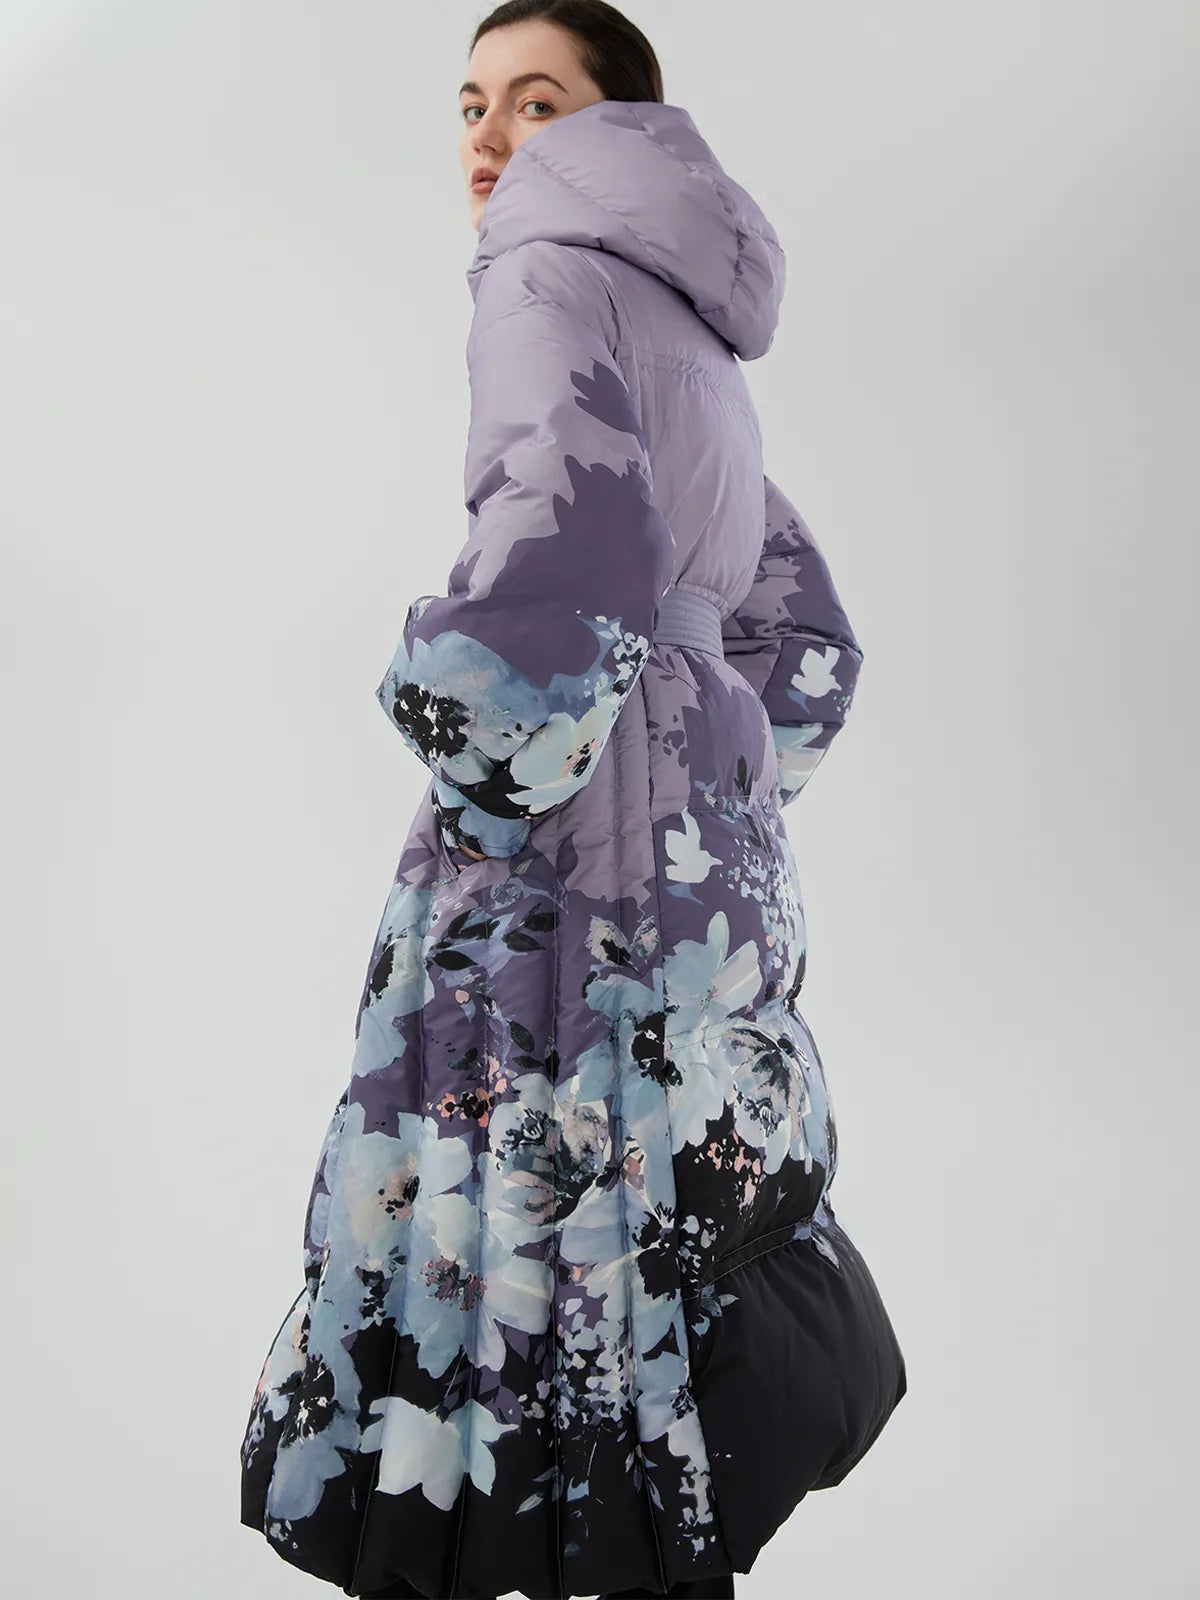 Elegant Hooded Purple Down Coat with Concentrated Floral Print